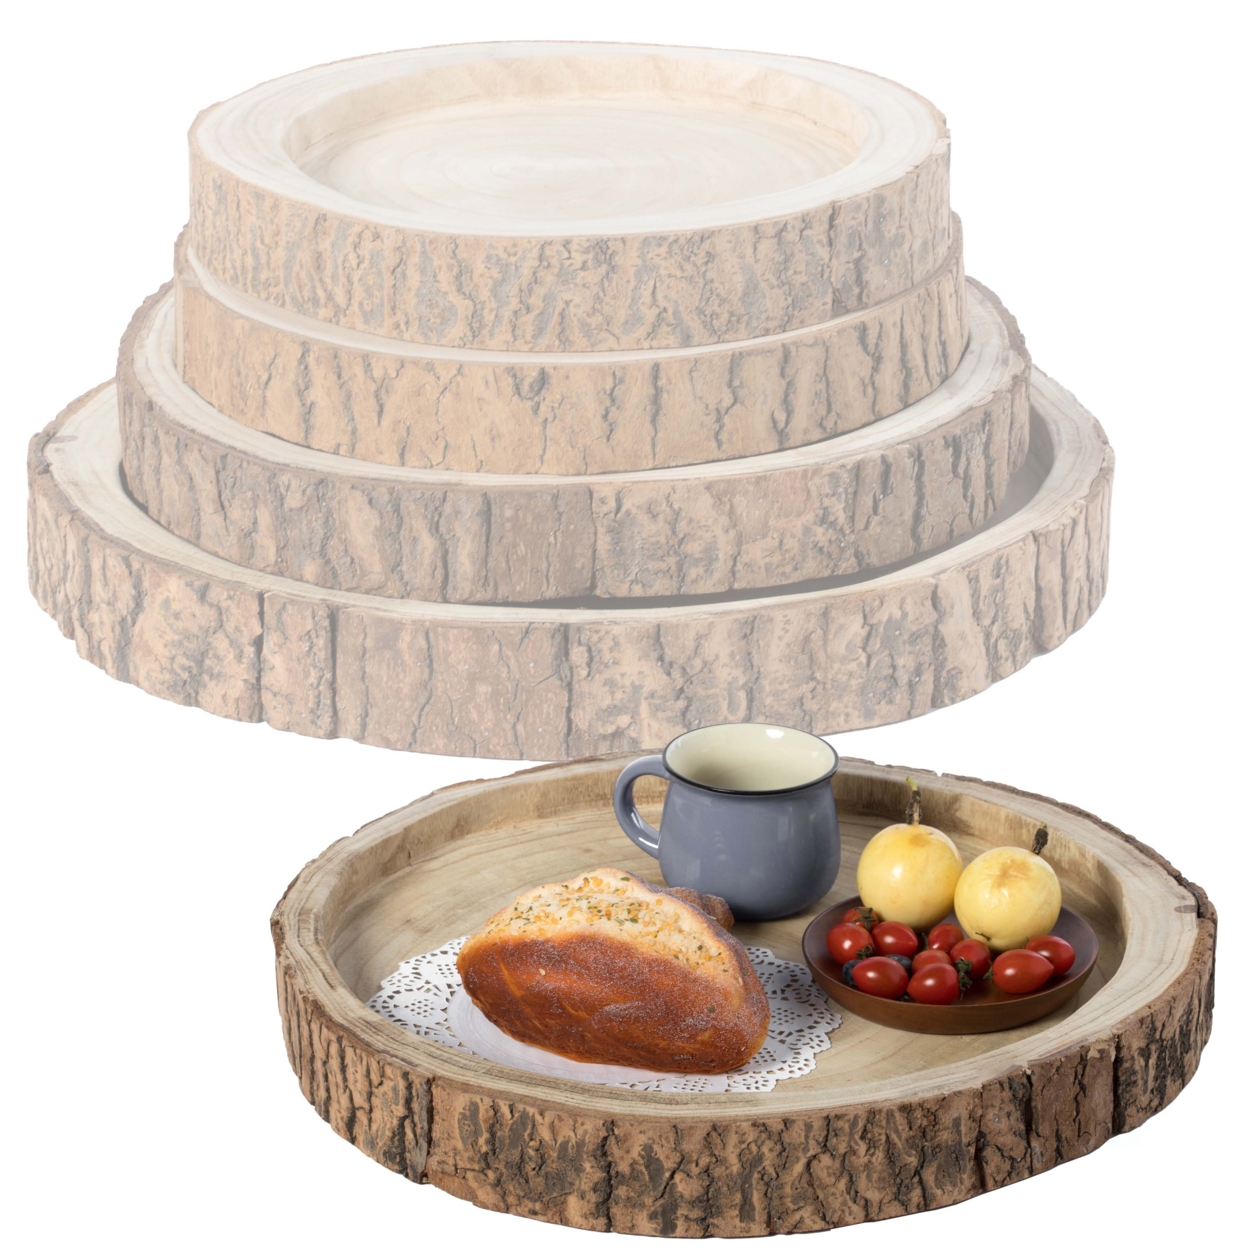 Wood Tree Bark Indented Display Tray Serving Plate Platter Charger - Set Of 4